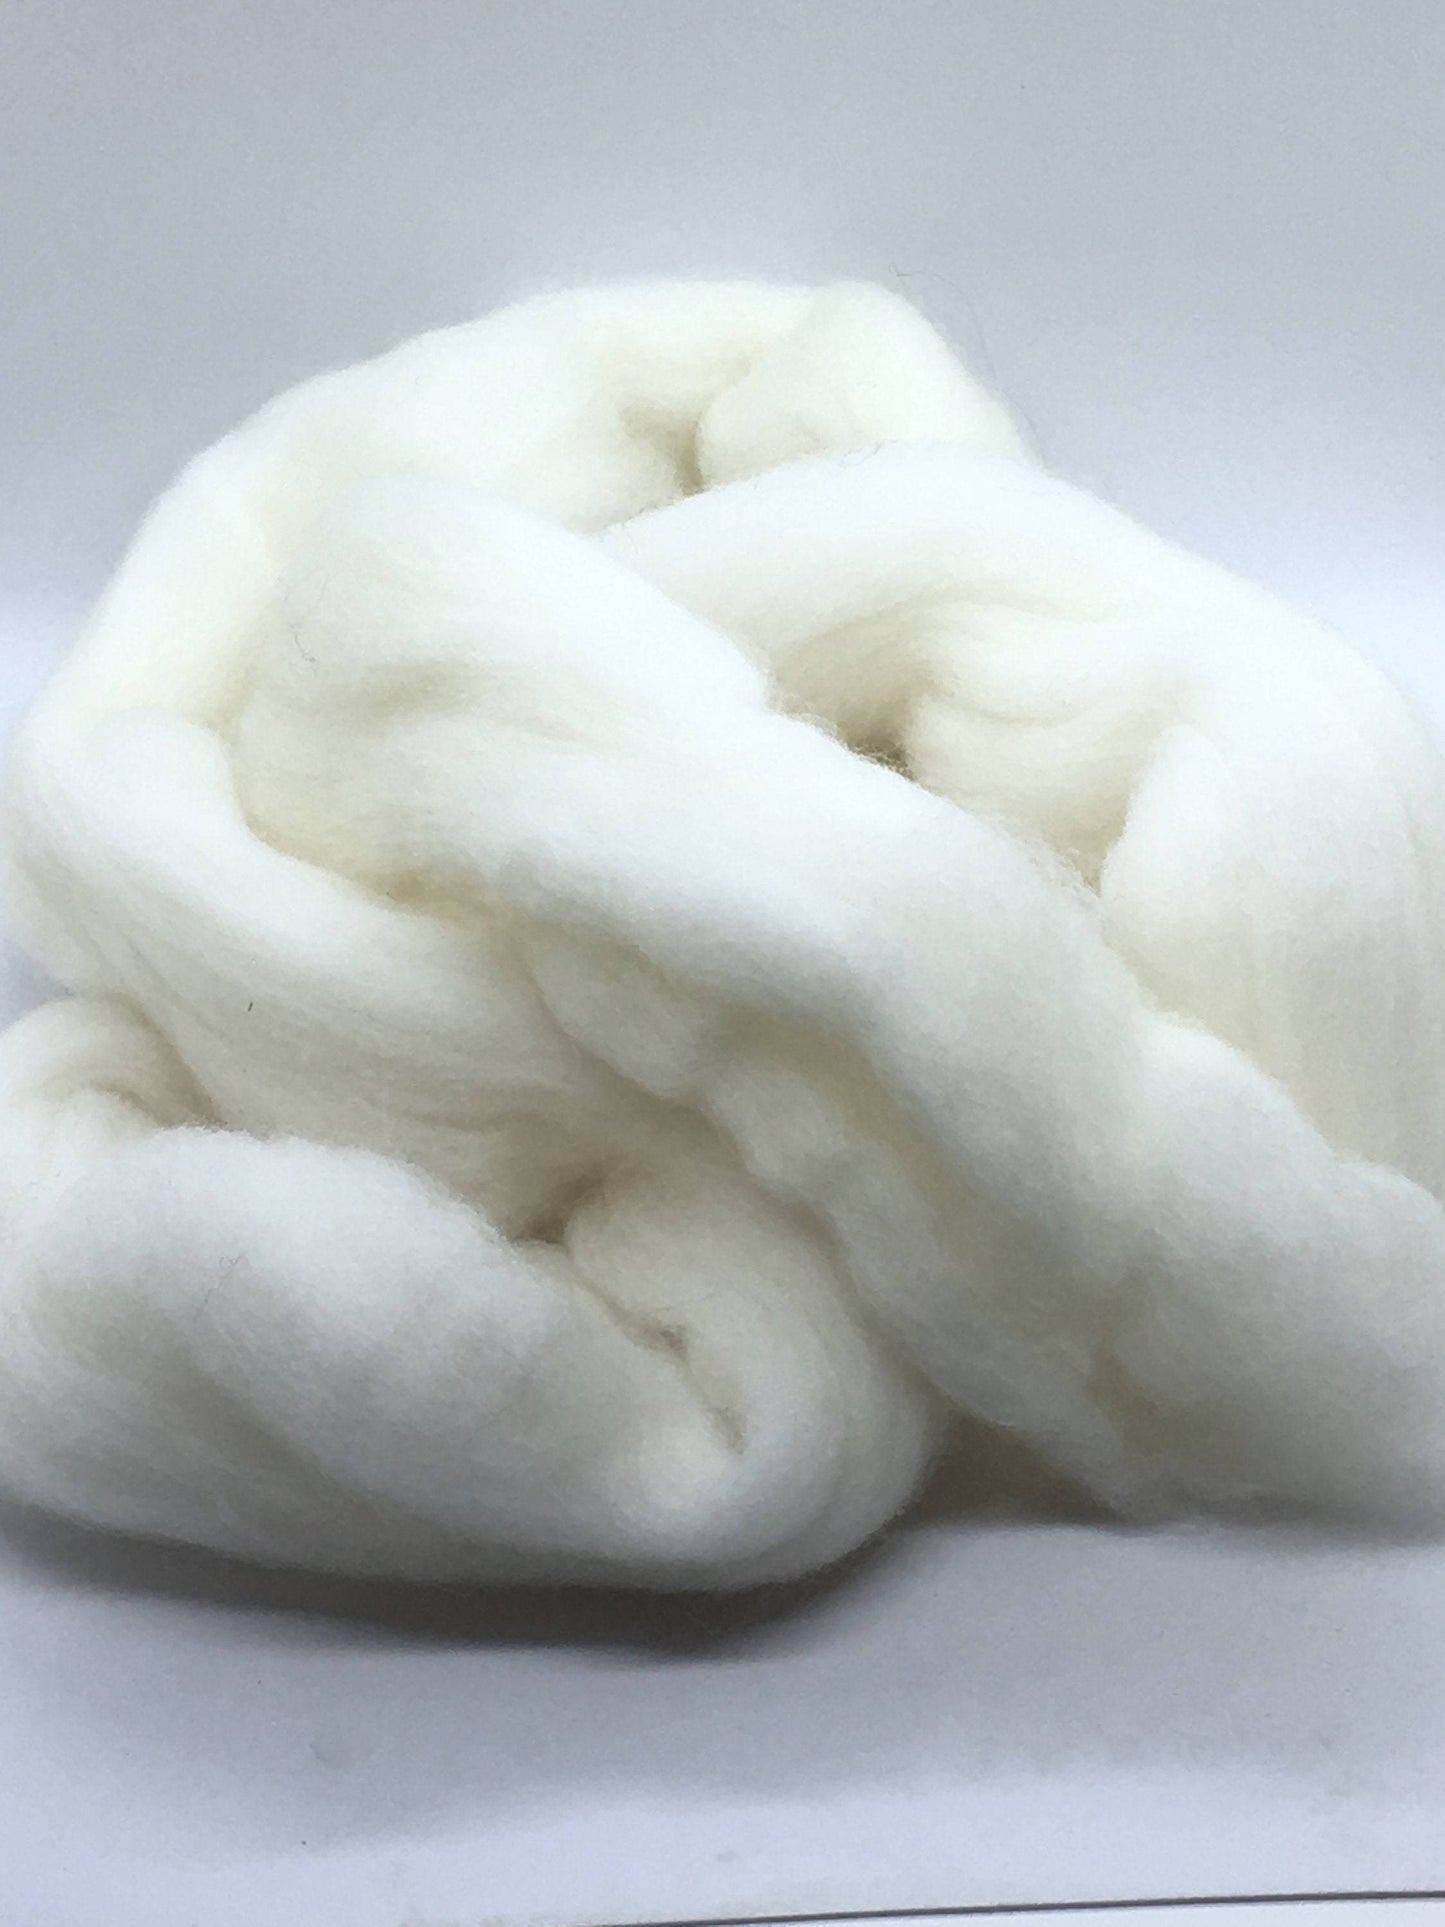 Natural White Wool Roving, Spin wool, Spin Fiber, White Wool Roving, Wool for felting, Wool Roving, Wool top, Wool for Spinning, FREE SHIP